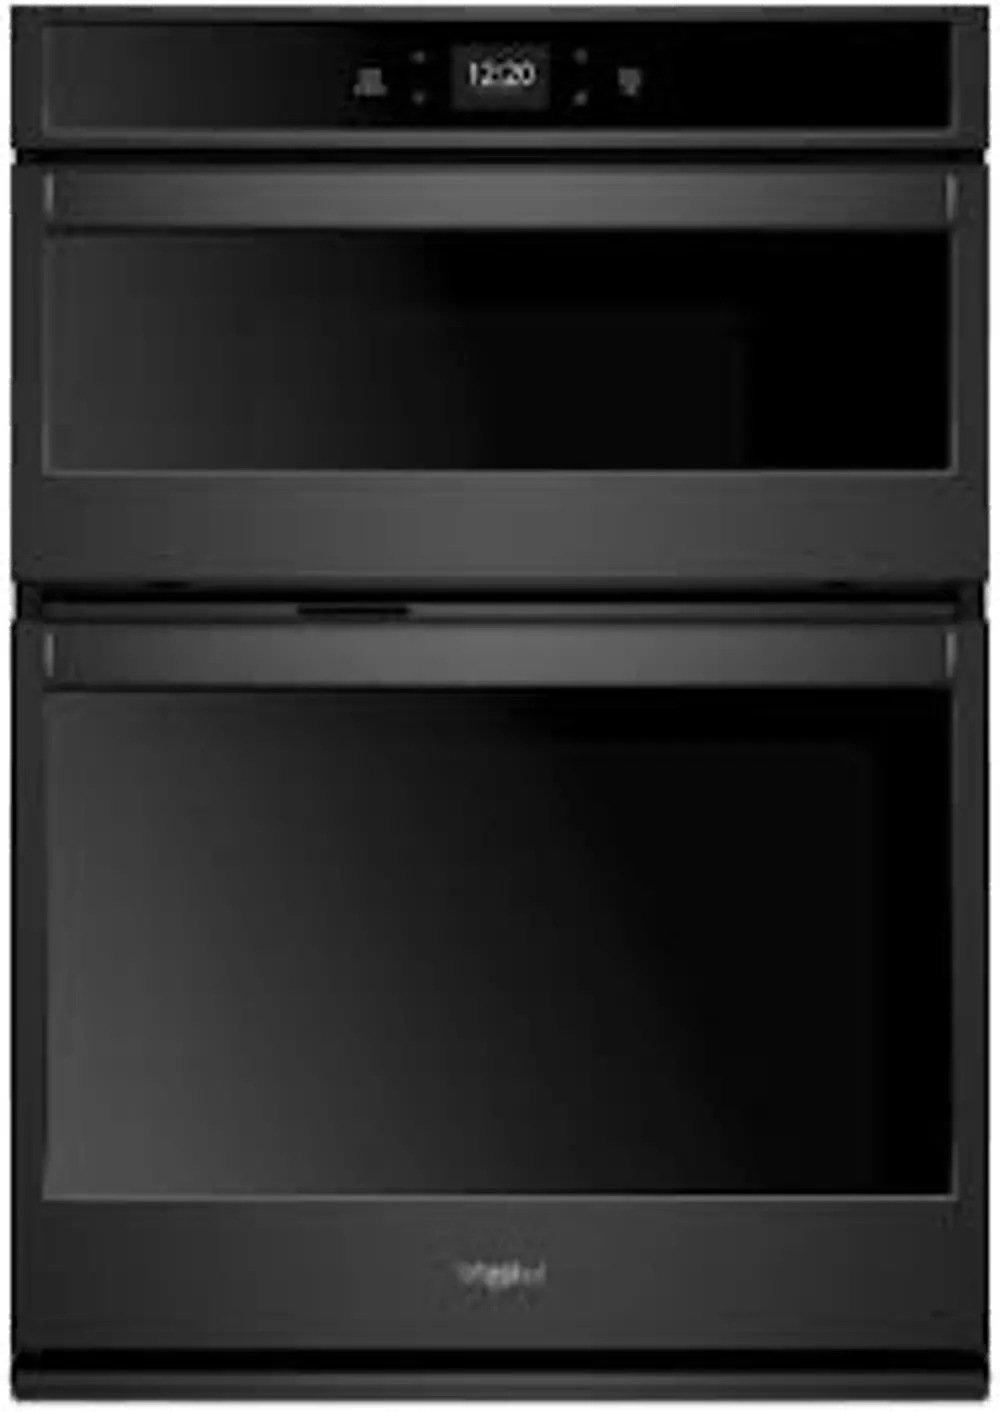 WOC54EC7HB Whirlpool 27 Inch Smart Combination Wall Oven with Microwave - 5.7 cu. ft. Black-1